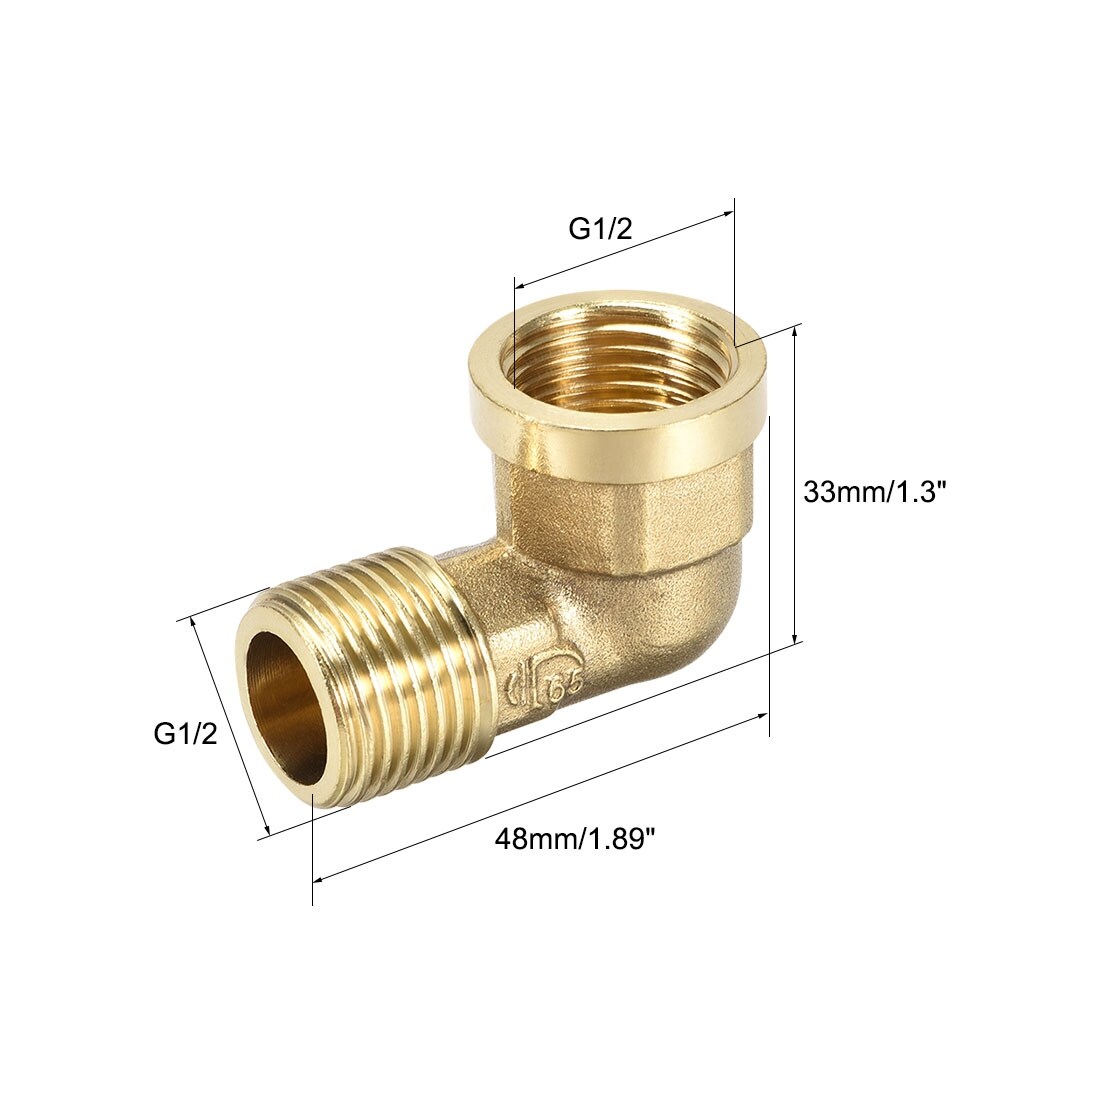 Details about   G1/2" Male x G1/2" Female Brass Pipe Fittings 90° Forged Street Elbow L Shape. 